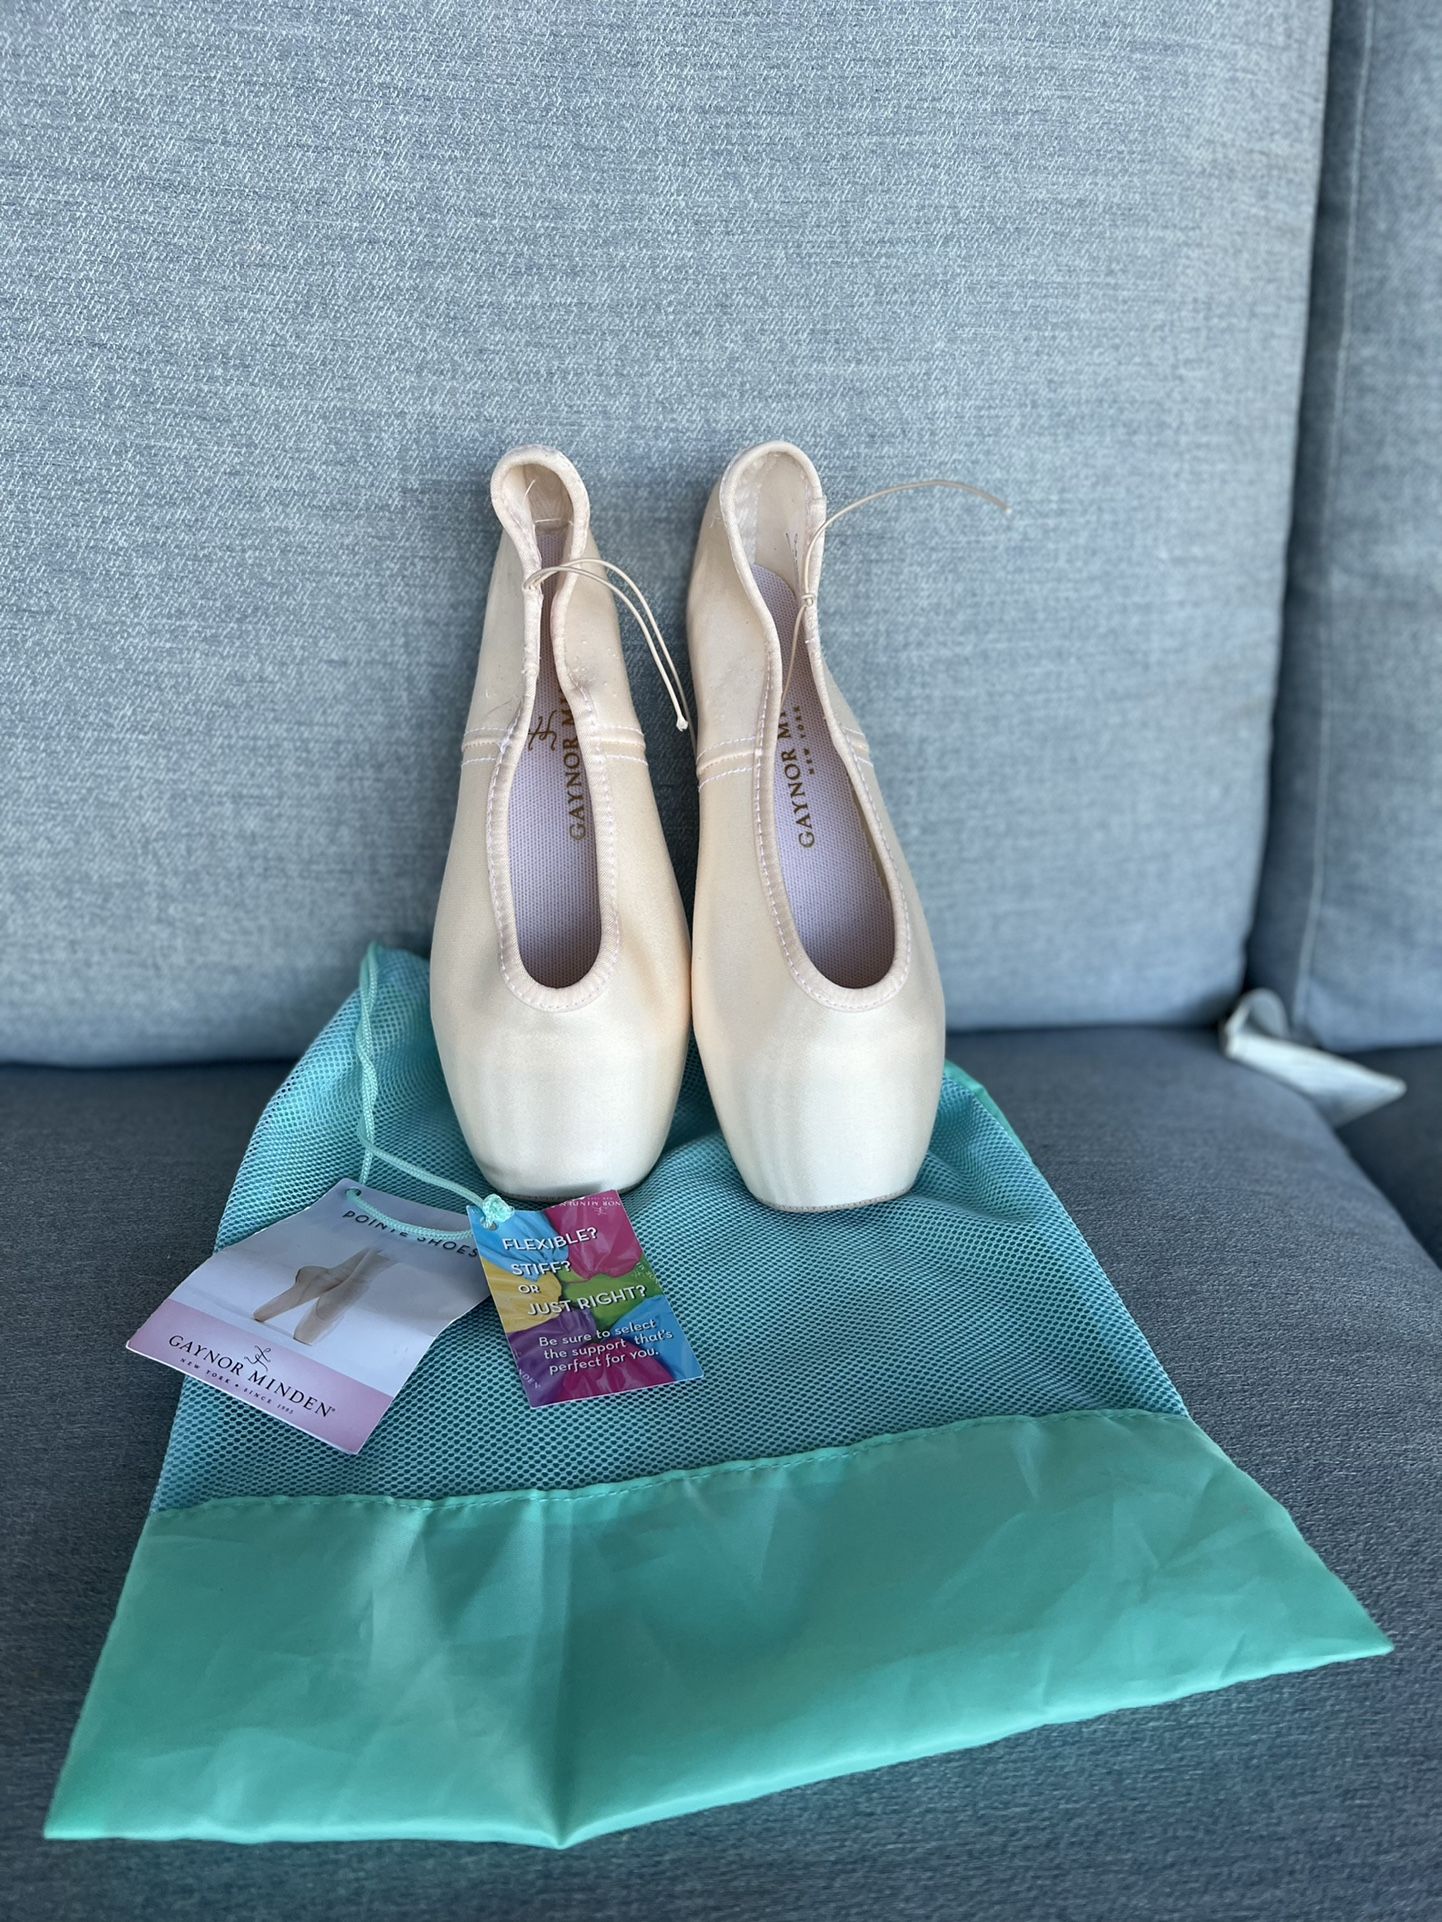 Gaynor Mindin pointe shoes Classic fit size 9.5 med 5 box  